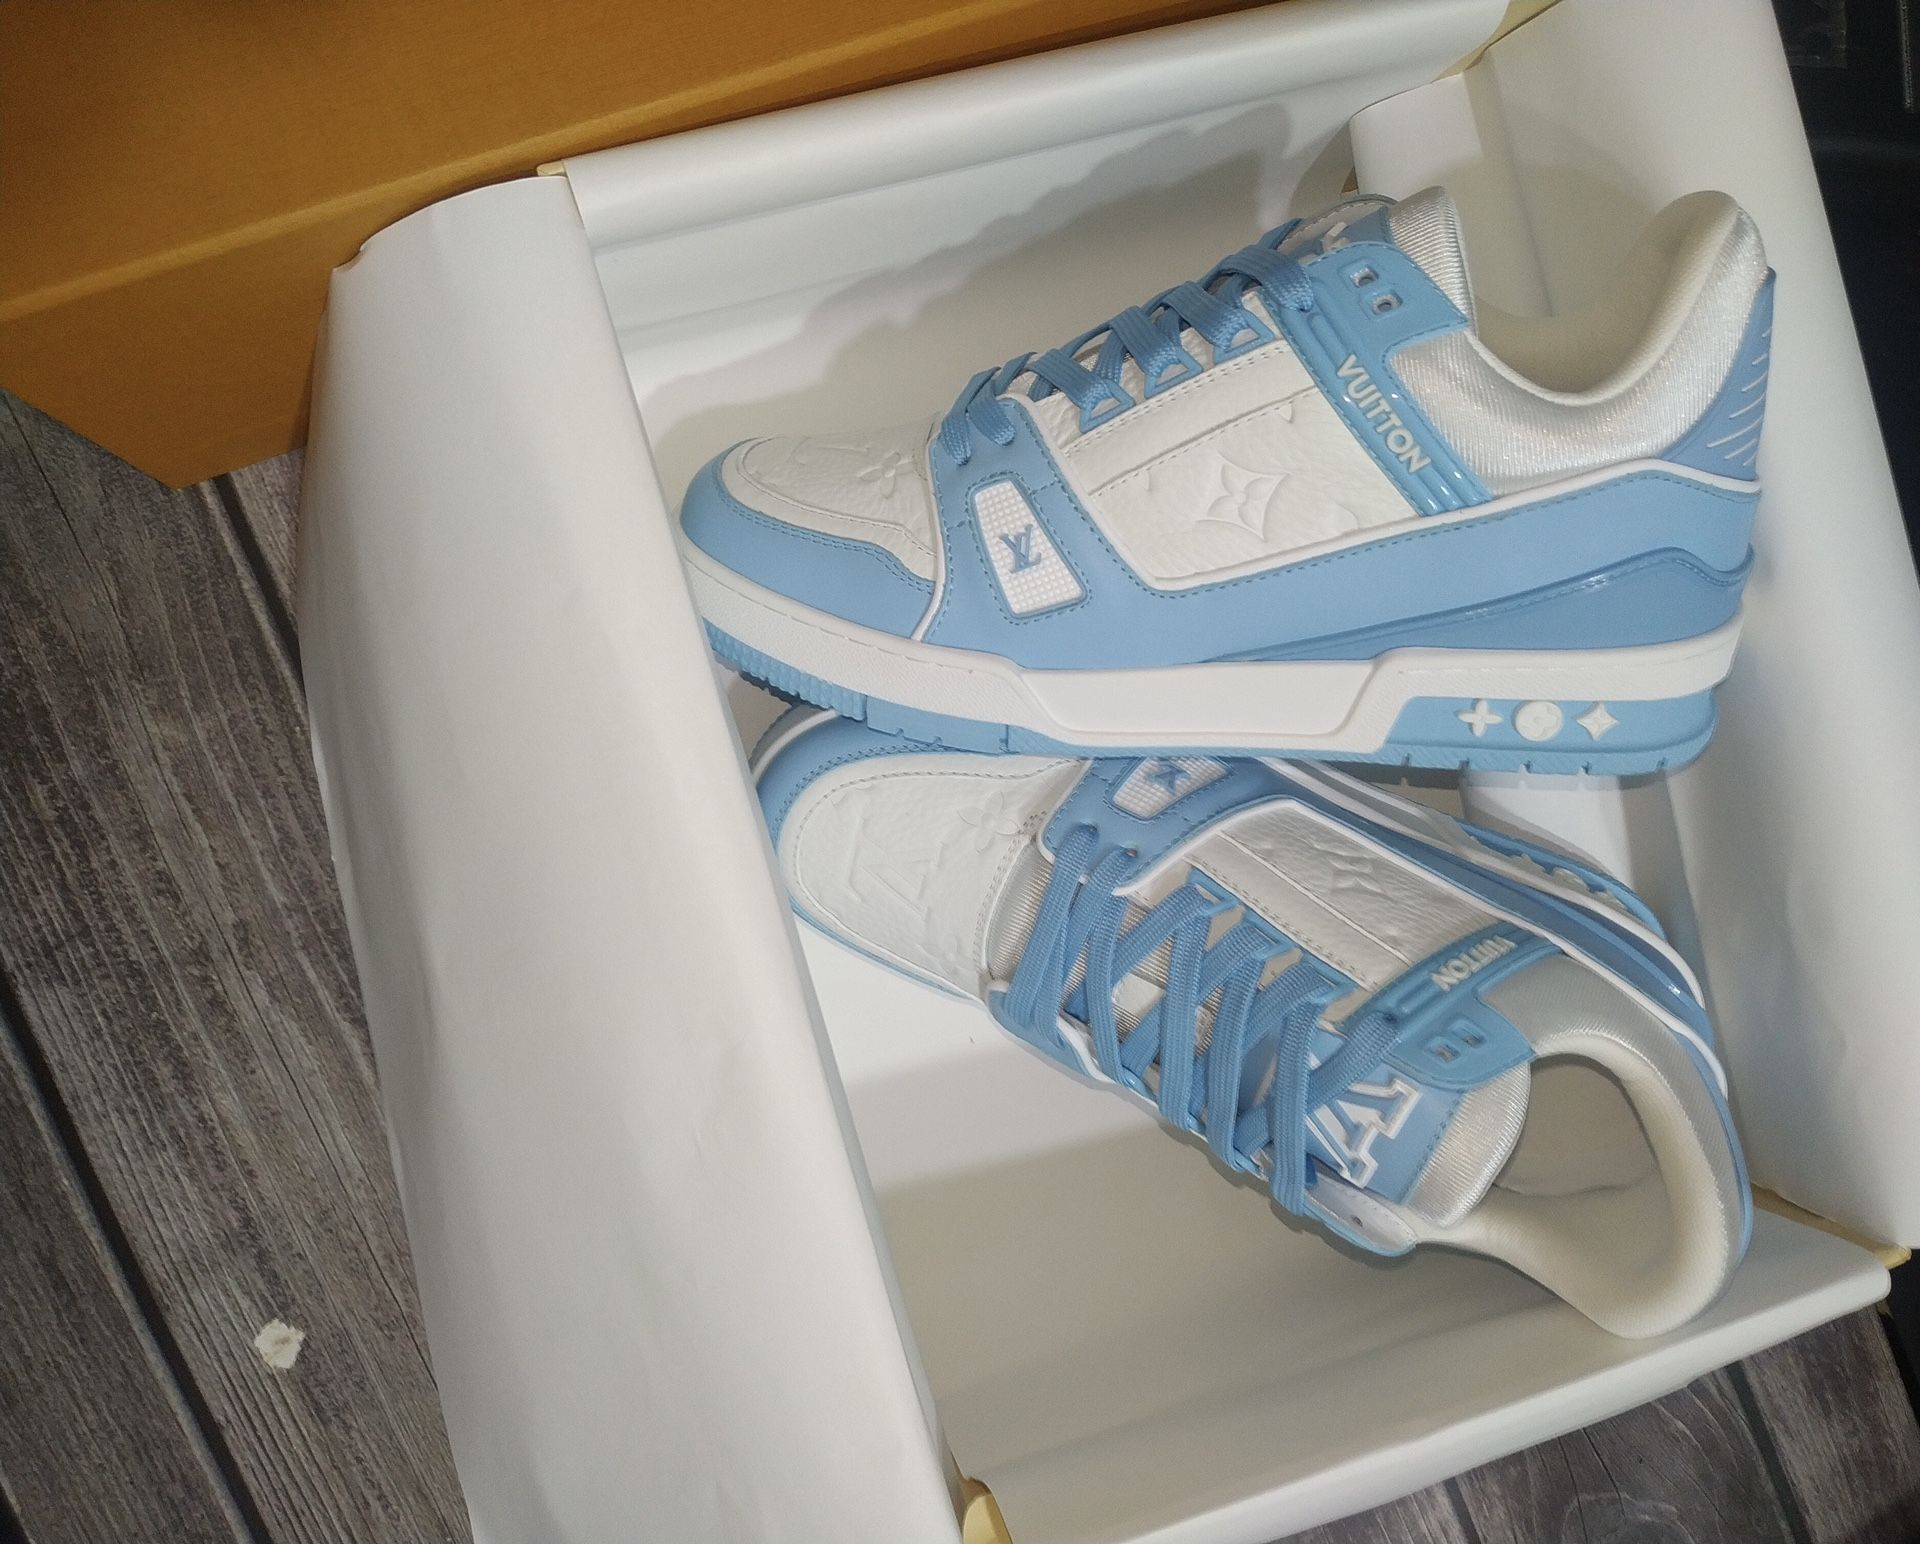 New Authentic Louis Vuitton Trainer #54 Graphic Print Blue/White Sneakers  (Euro 44/Men's 10-11) for Sale in Valley Stream, NY - OfferUp